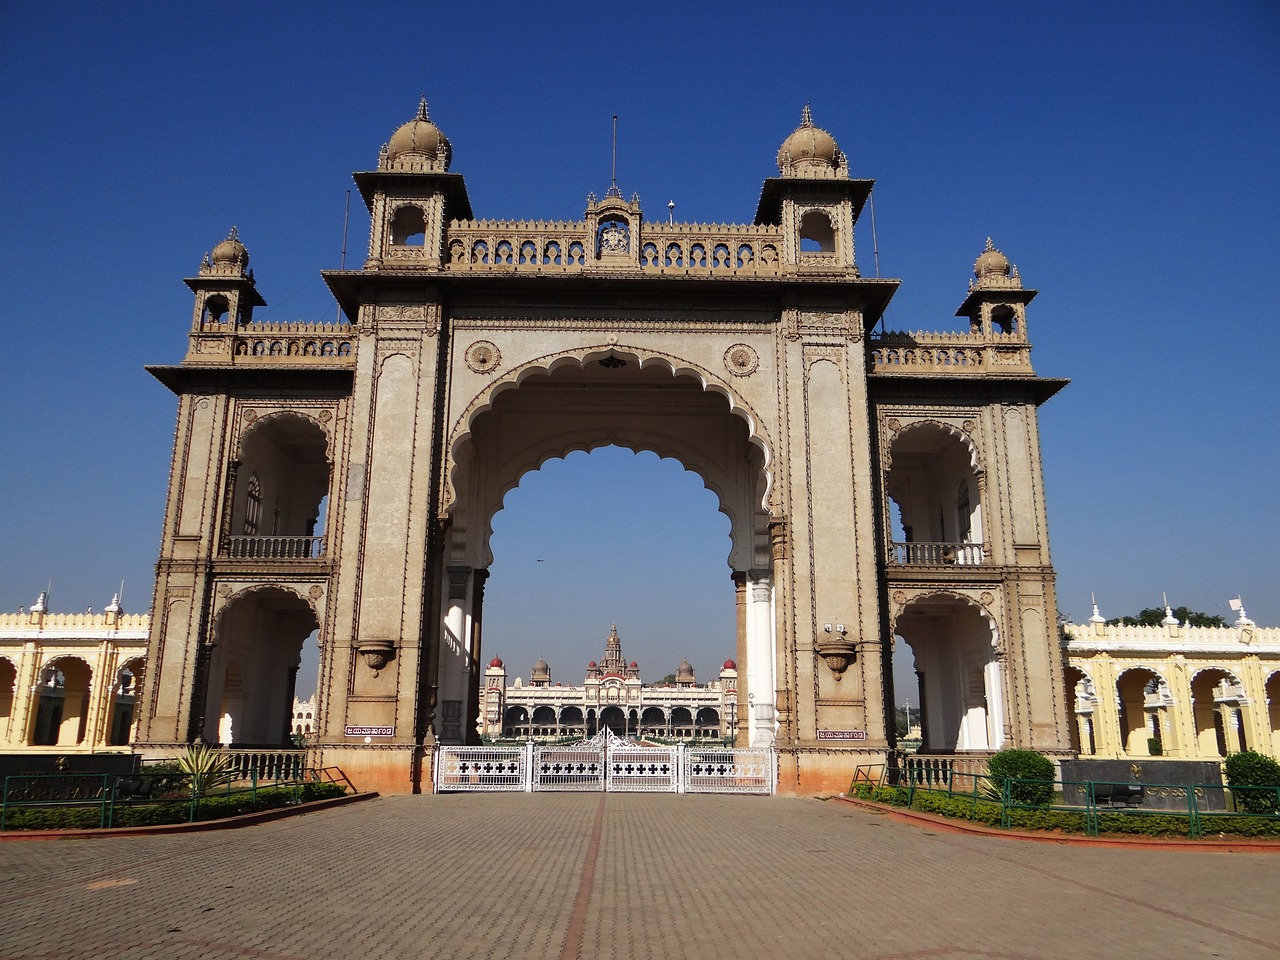 Royal Mysore: Palaces, Gardens, and Market Delights